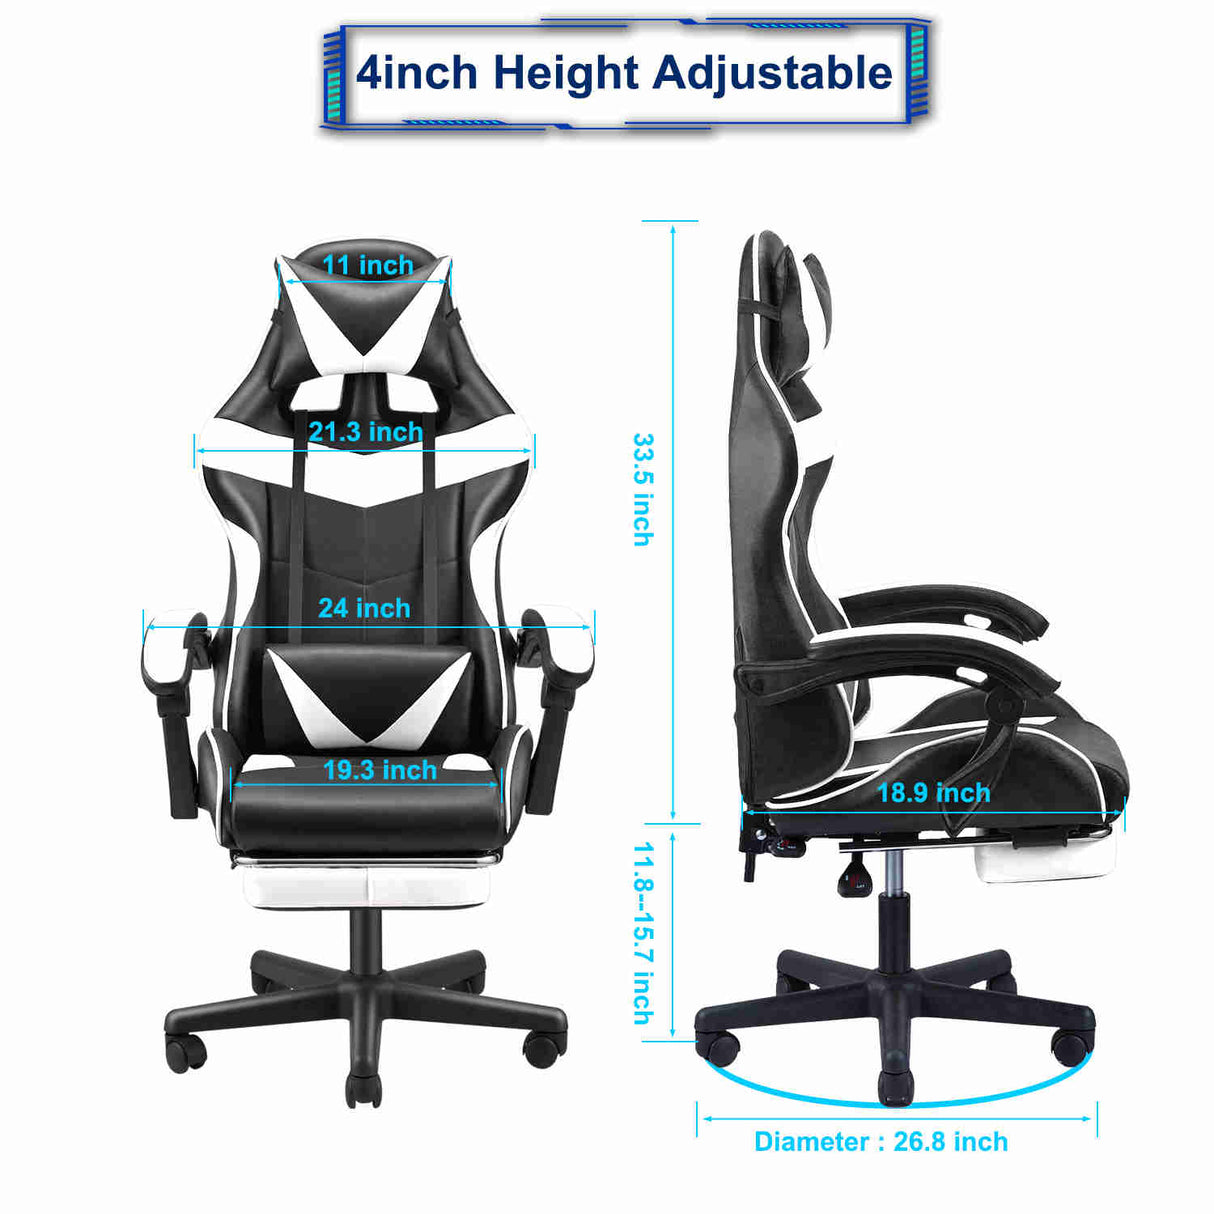 Black Bull Gaming Chair with Foot rest - White - Level UpBlack BullGaming Chair4044951074134